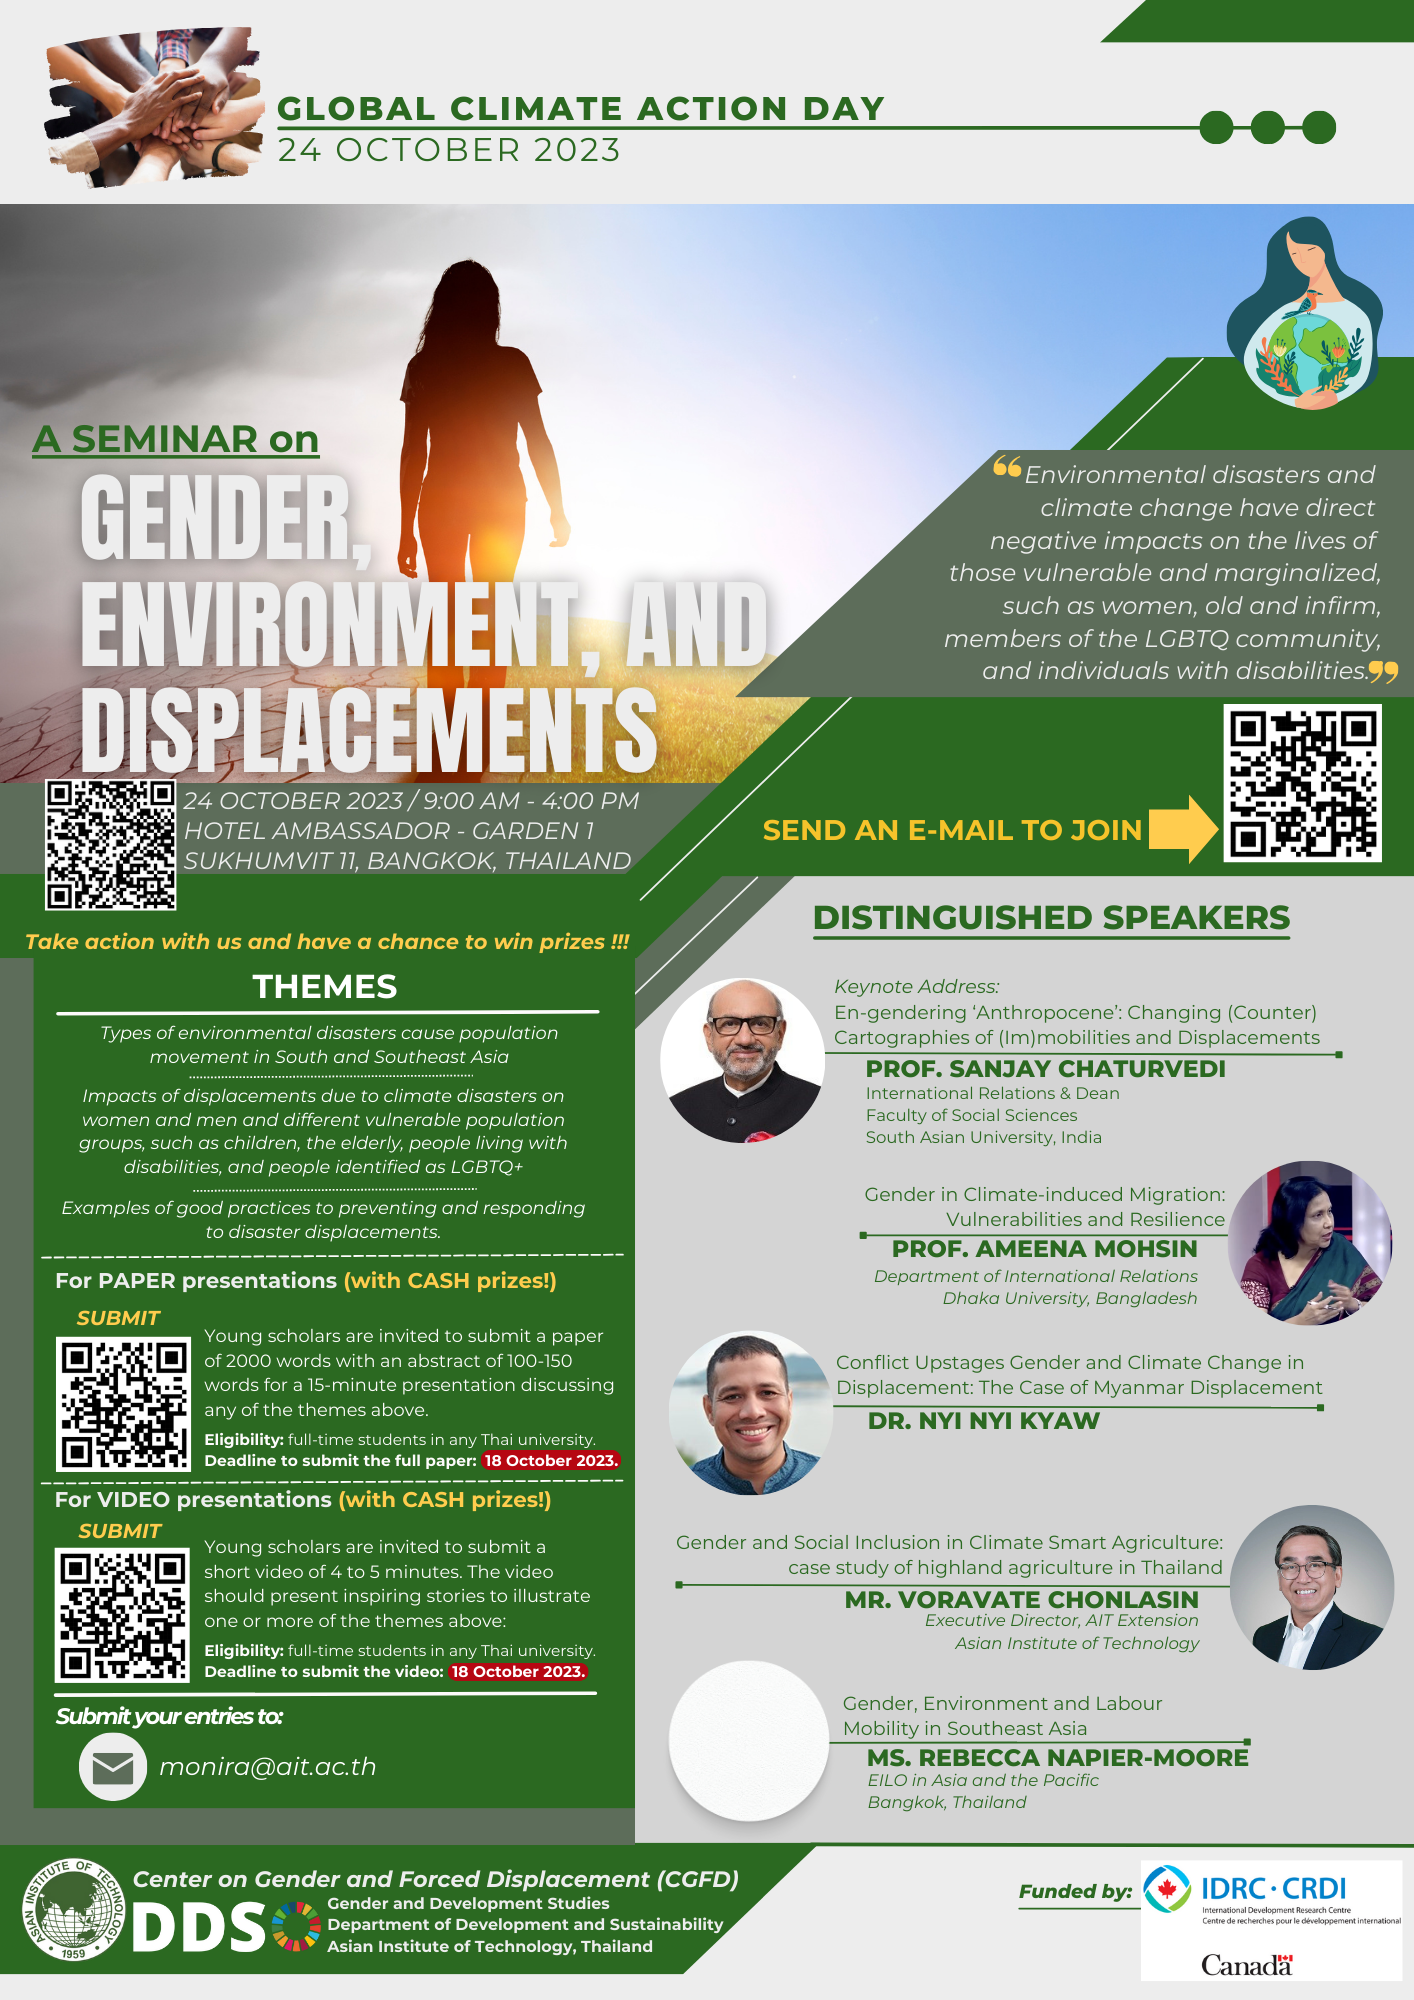 A Seminar on “Gender, Environment, and Displacements”